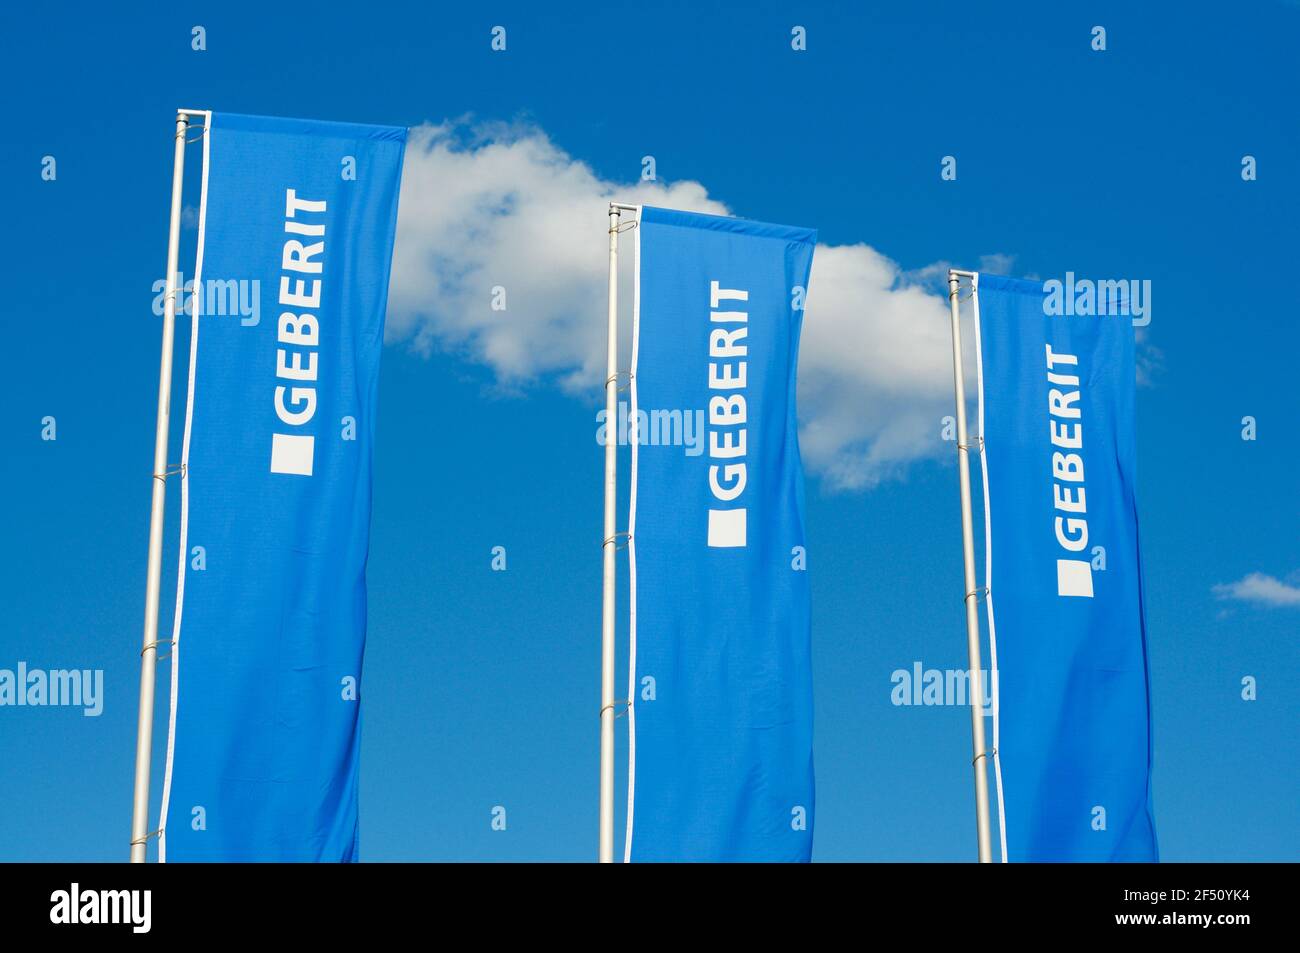 Manno, Switzerland - 18th March 2021 : View of three Geberit company flags against blue sky in Switzerland. Geberit is a Swiss multinational specializ Stock Photo